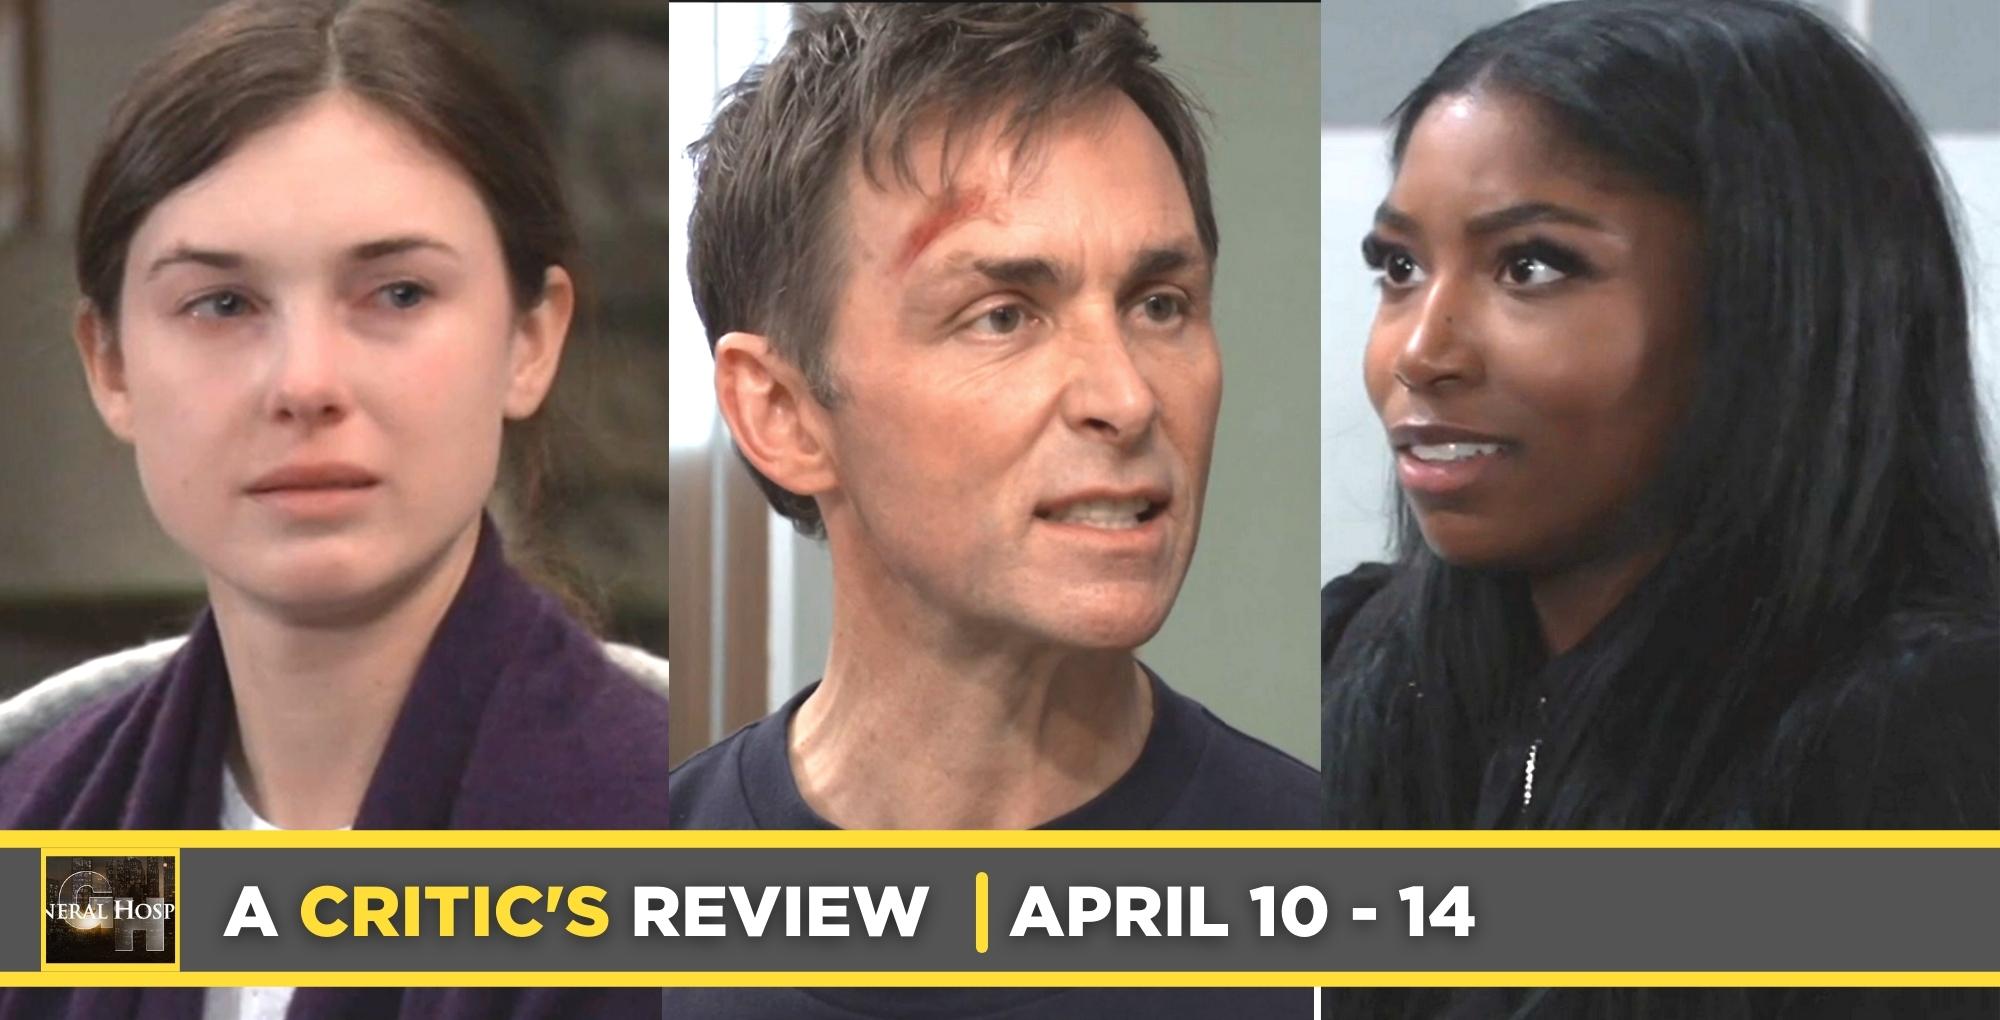 general hospital critic's review for april 10 – april 14, 2023, three images willow, valentin, and trina